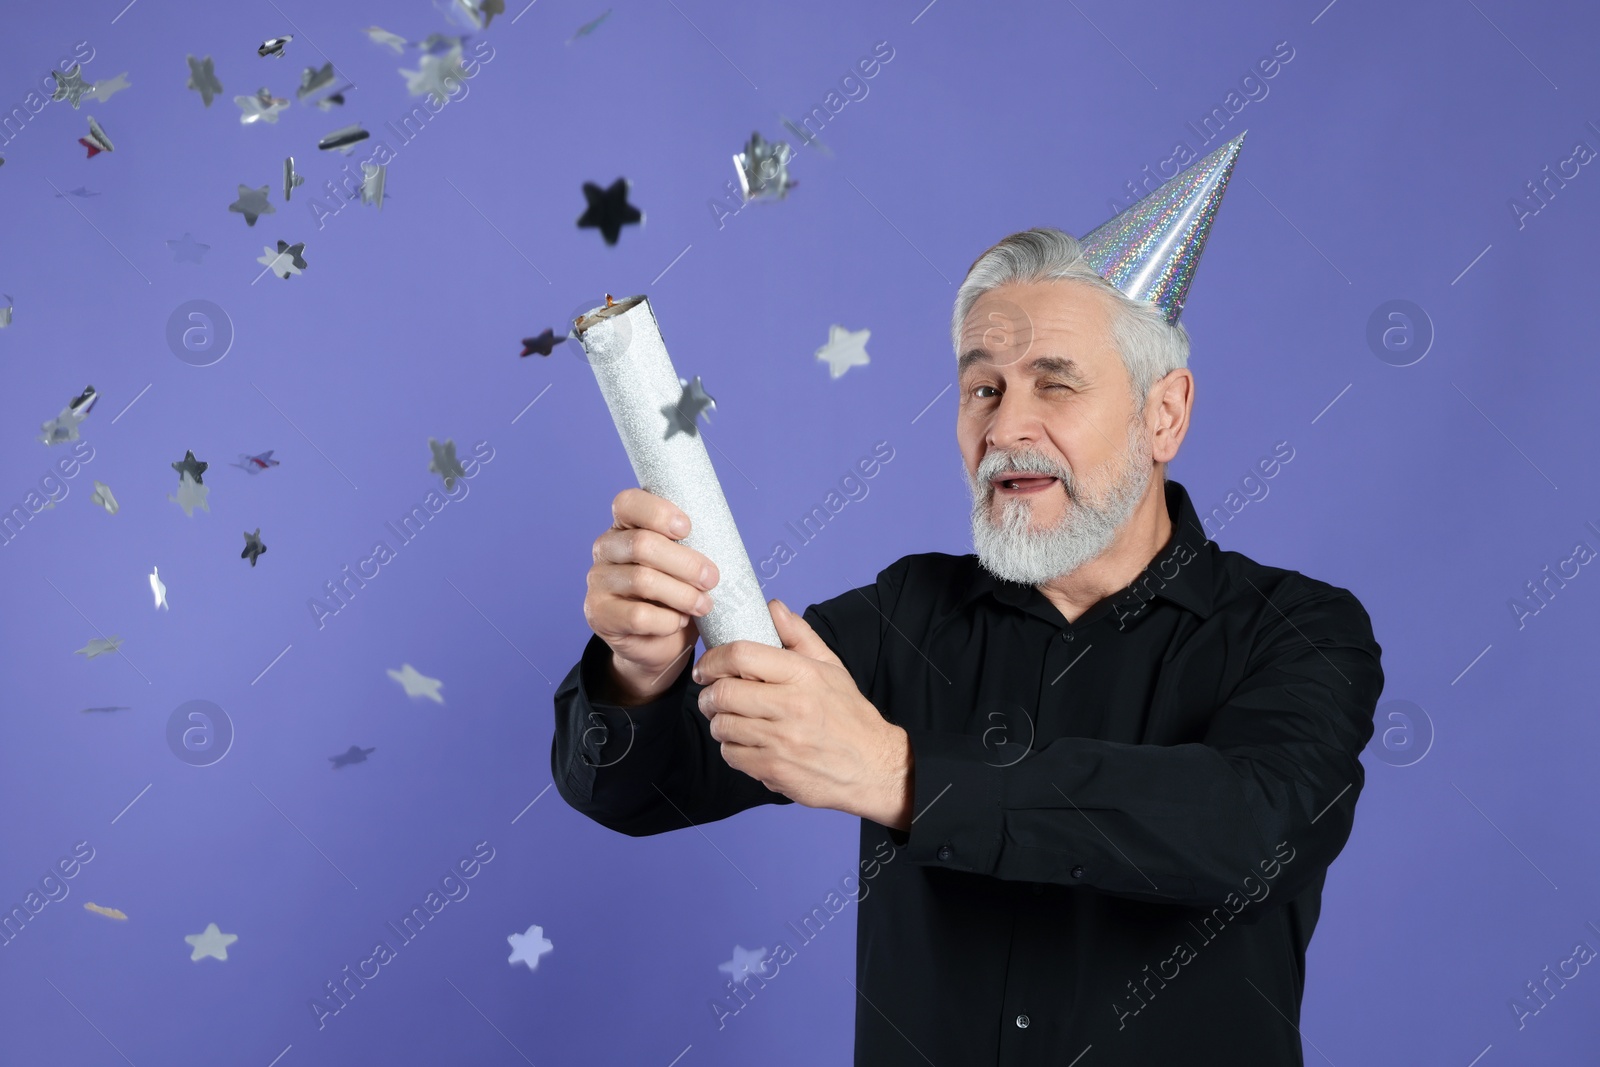 Photo of Man blowing up party popper and winking on purple background